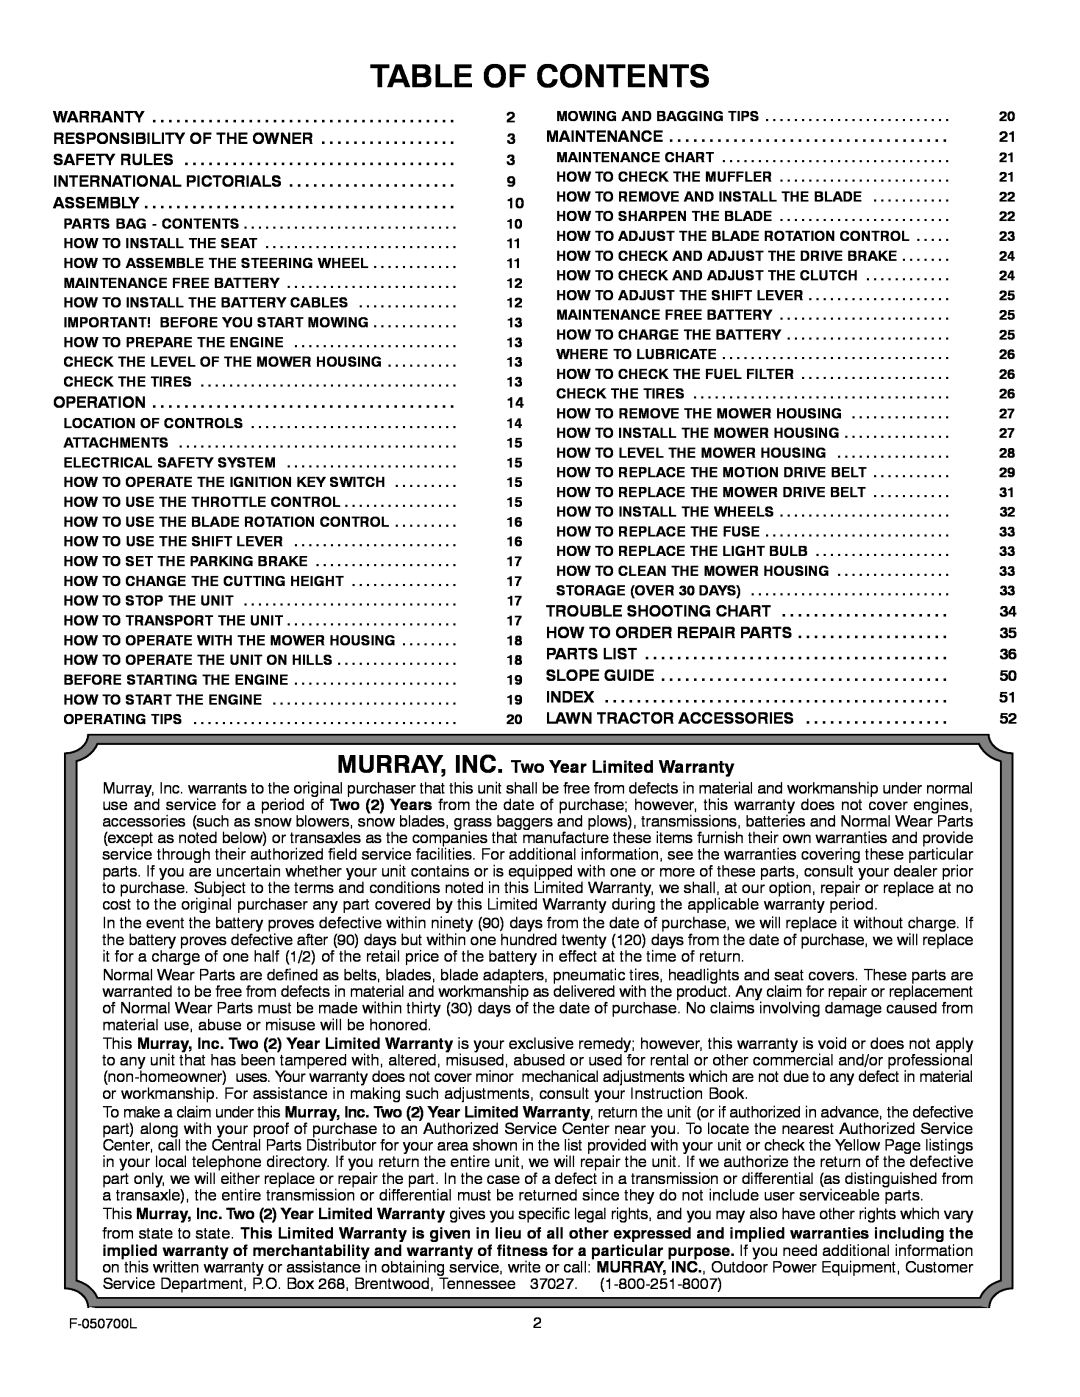 Murray 405000x8E manual Table Of Contents, MURRAY, INC. Two Year Limited Warranty 